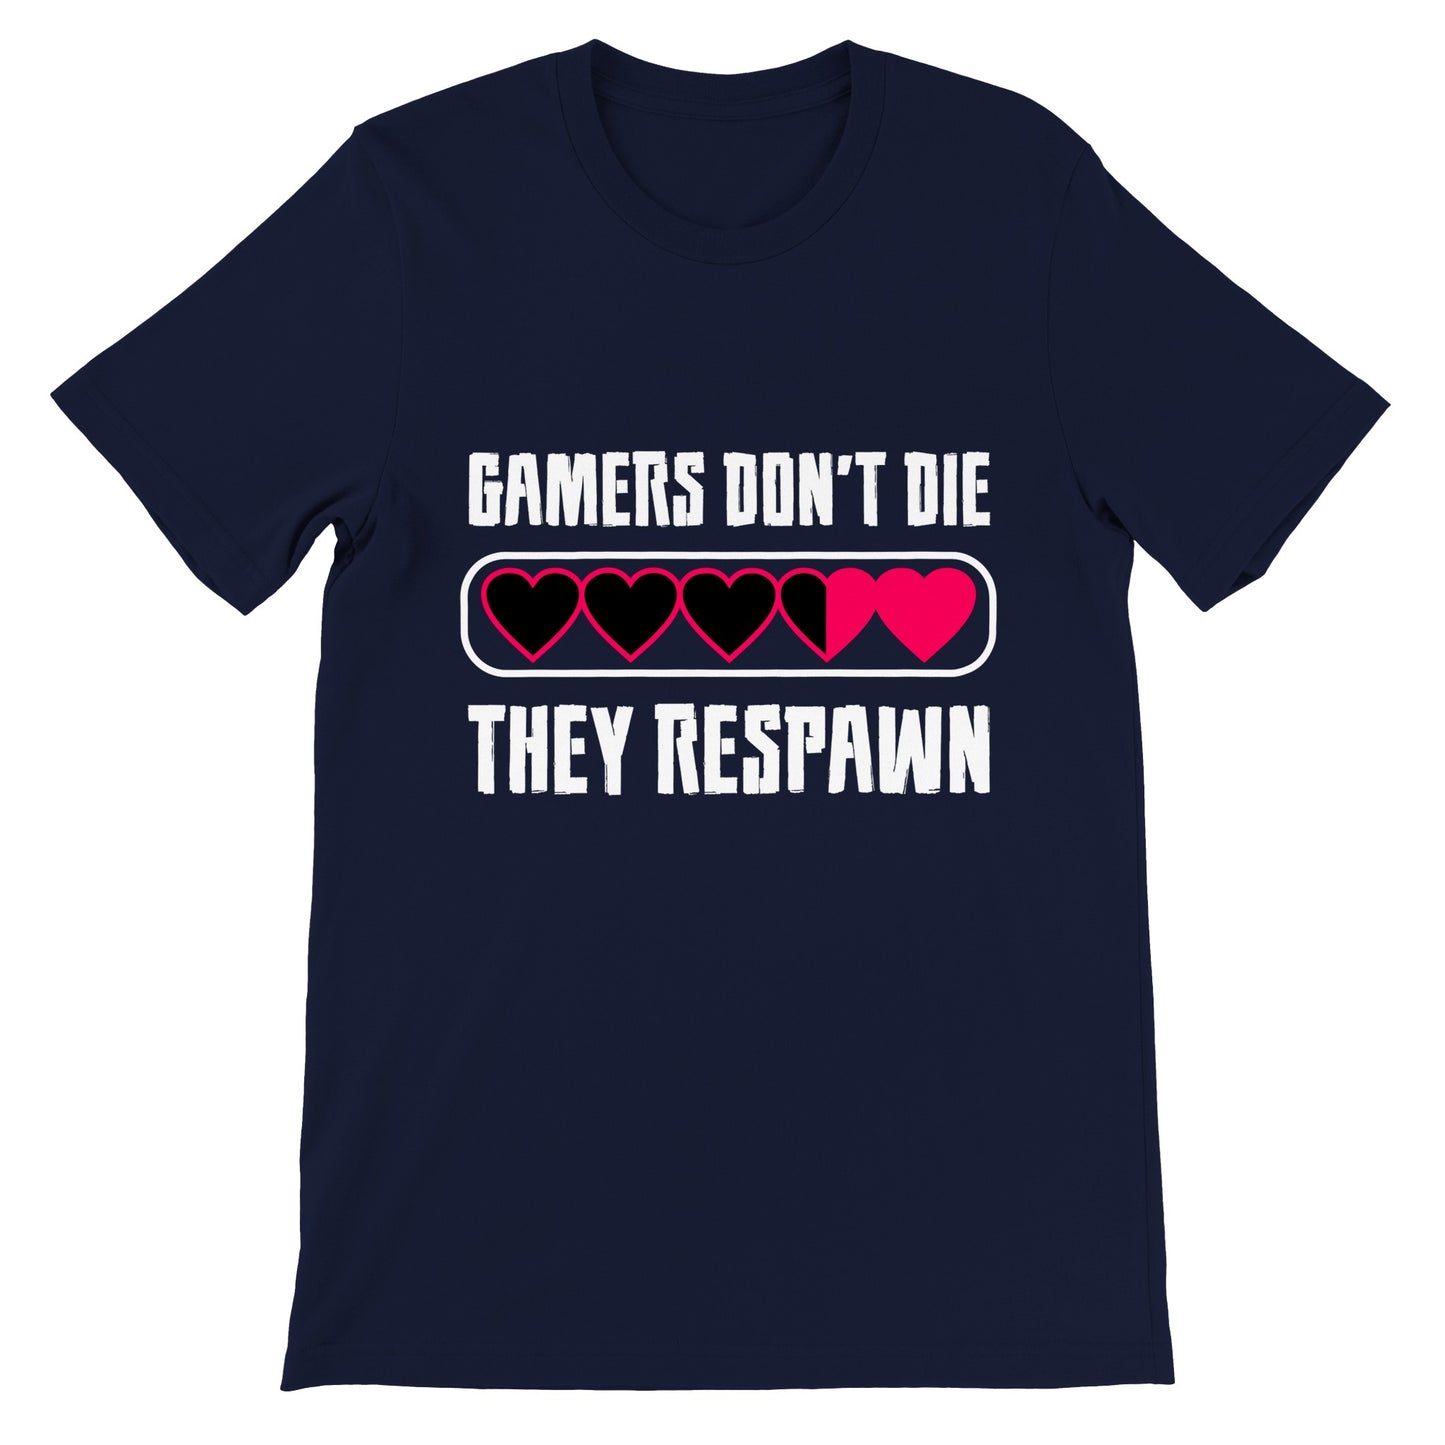 Gaming T-shirts - Gamers Dont Die They Respawn - Premium Unisex T-shirt 